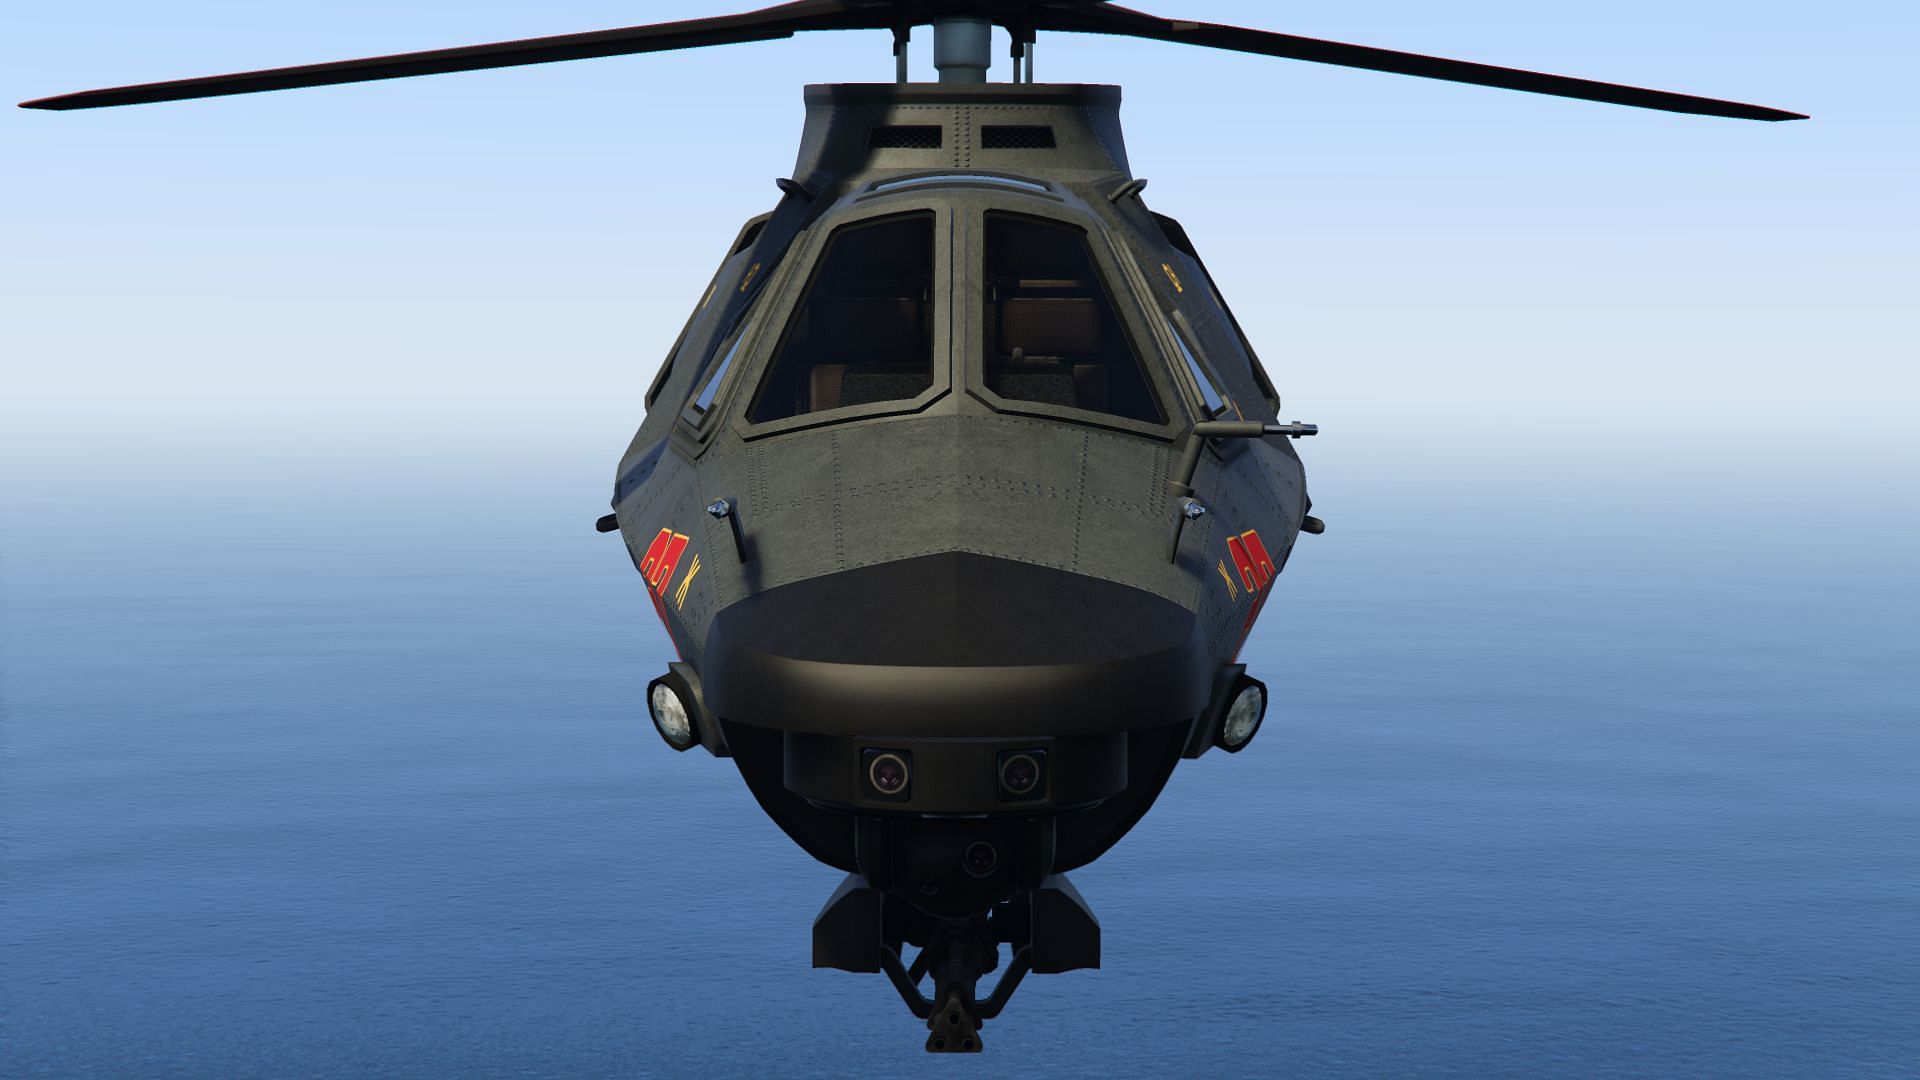 The front view of this military helicopter (Image via Rockstar Games)